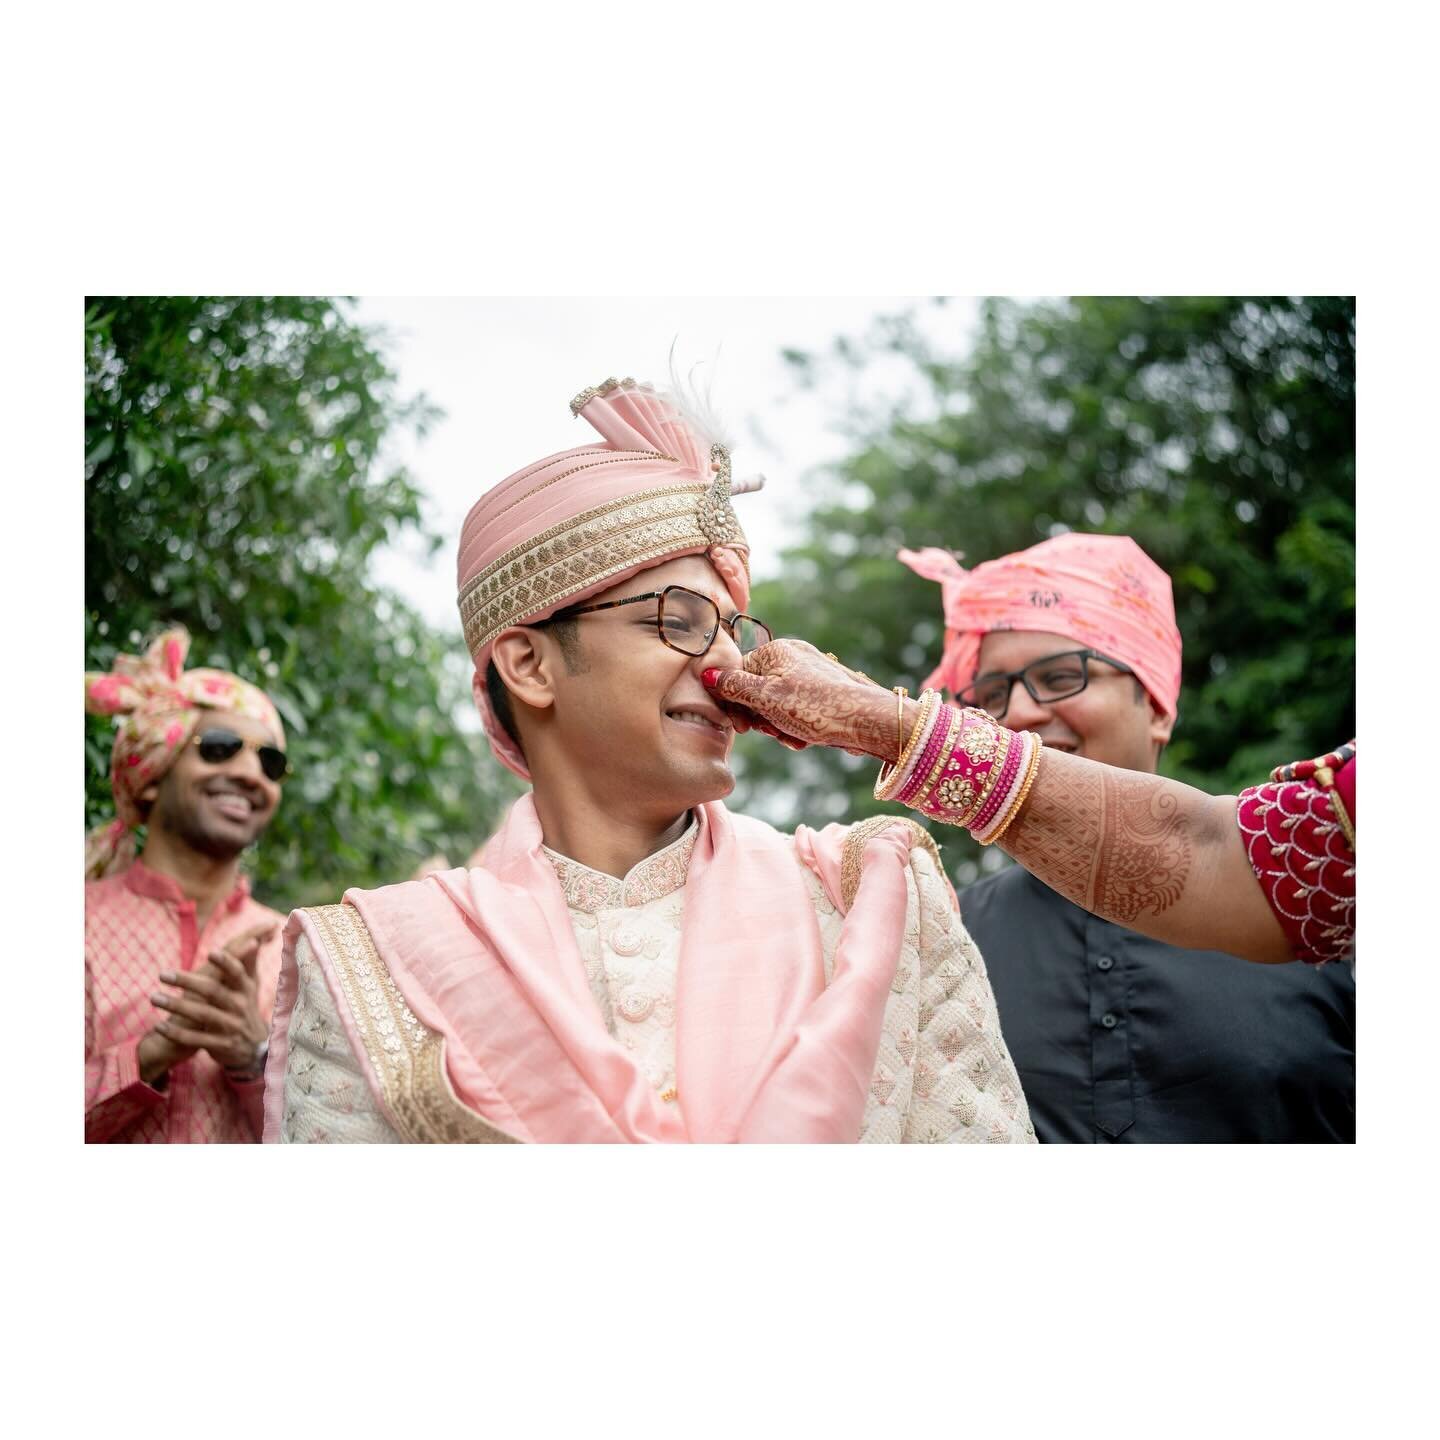 Steeped in tradition and playfulness, Gujarati weddings feature the heartwarming Ponkvu or Ponkhana ceremony. Here, the groom is welcomed by his mother-in-law with an aarti, followed by a playful gesture - a gentle pull of the groom's nose. It's a ch